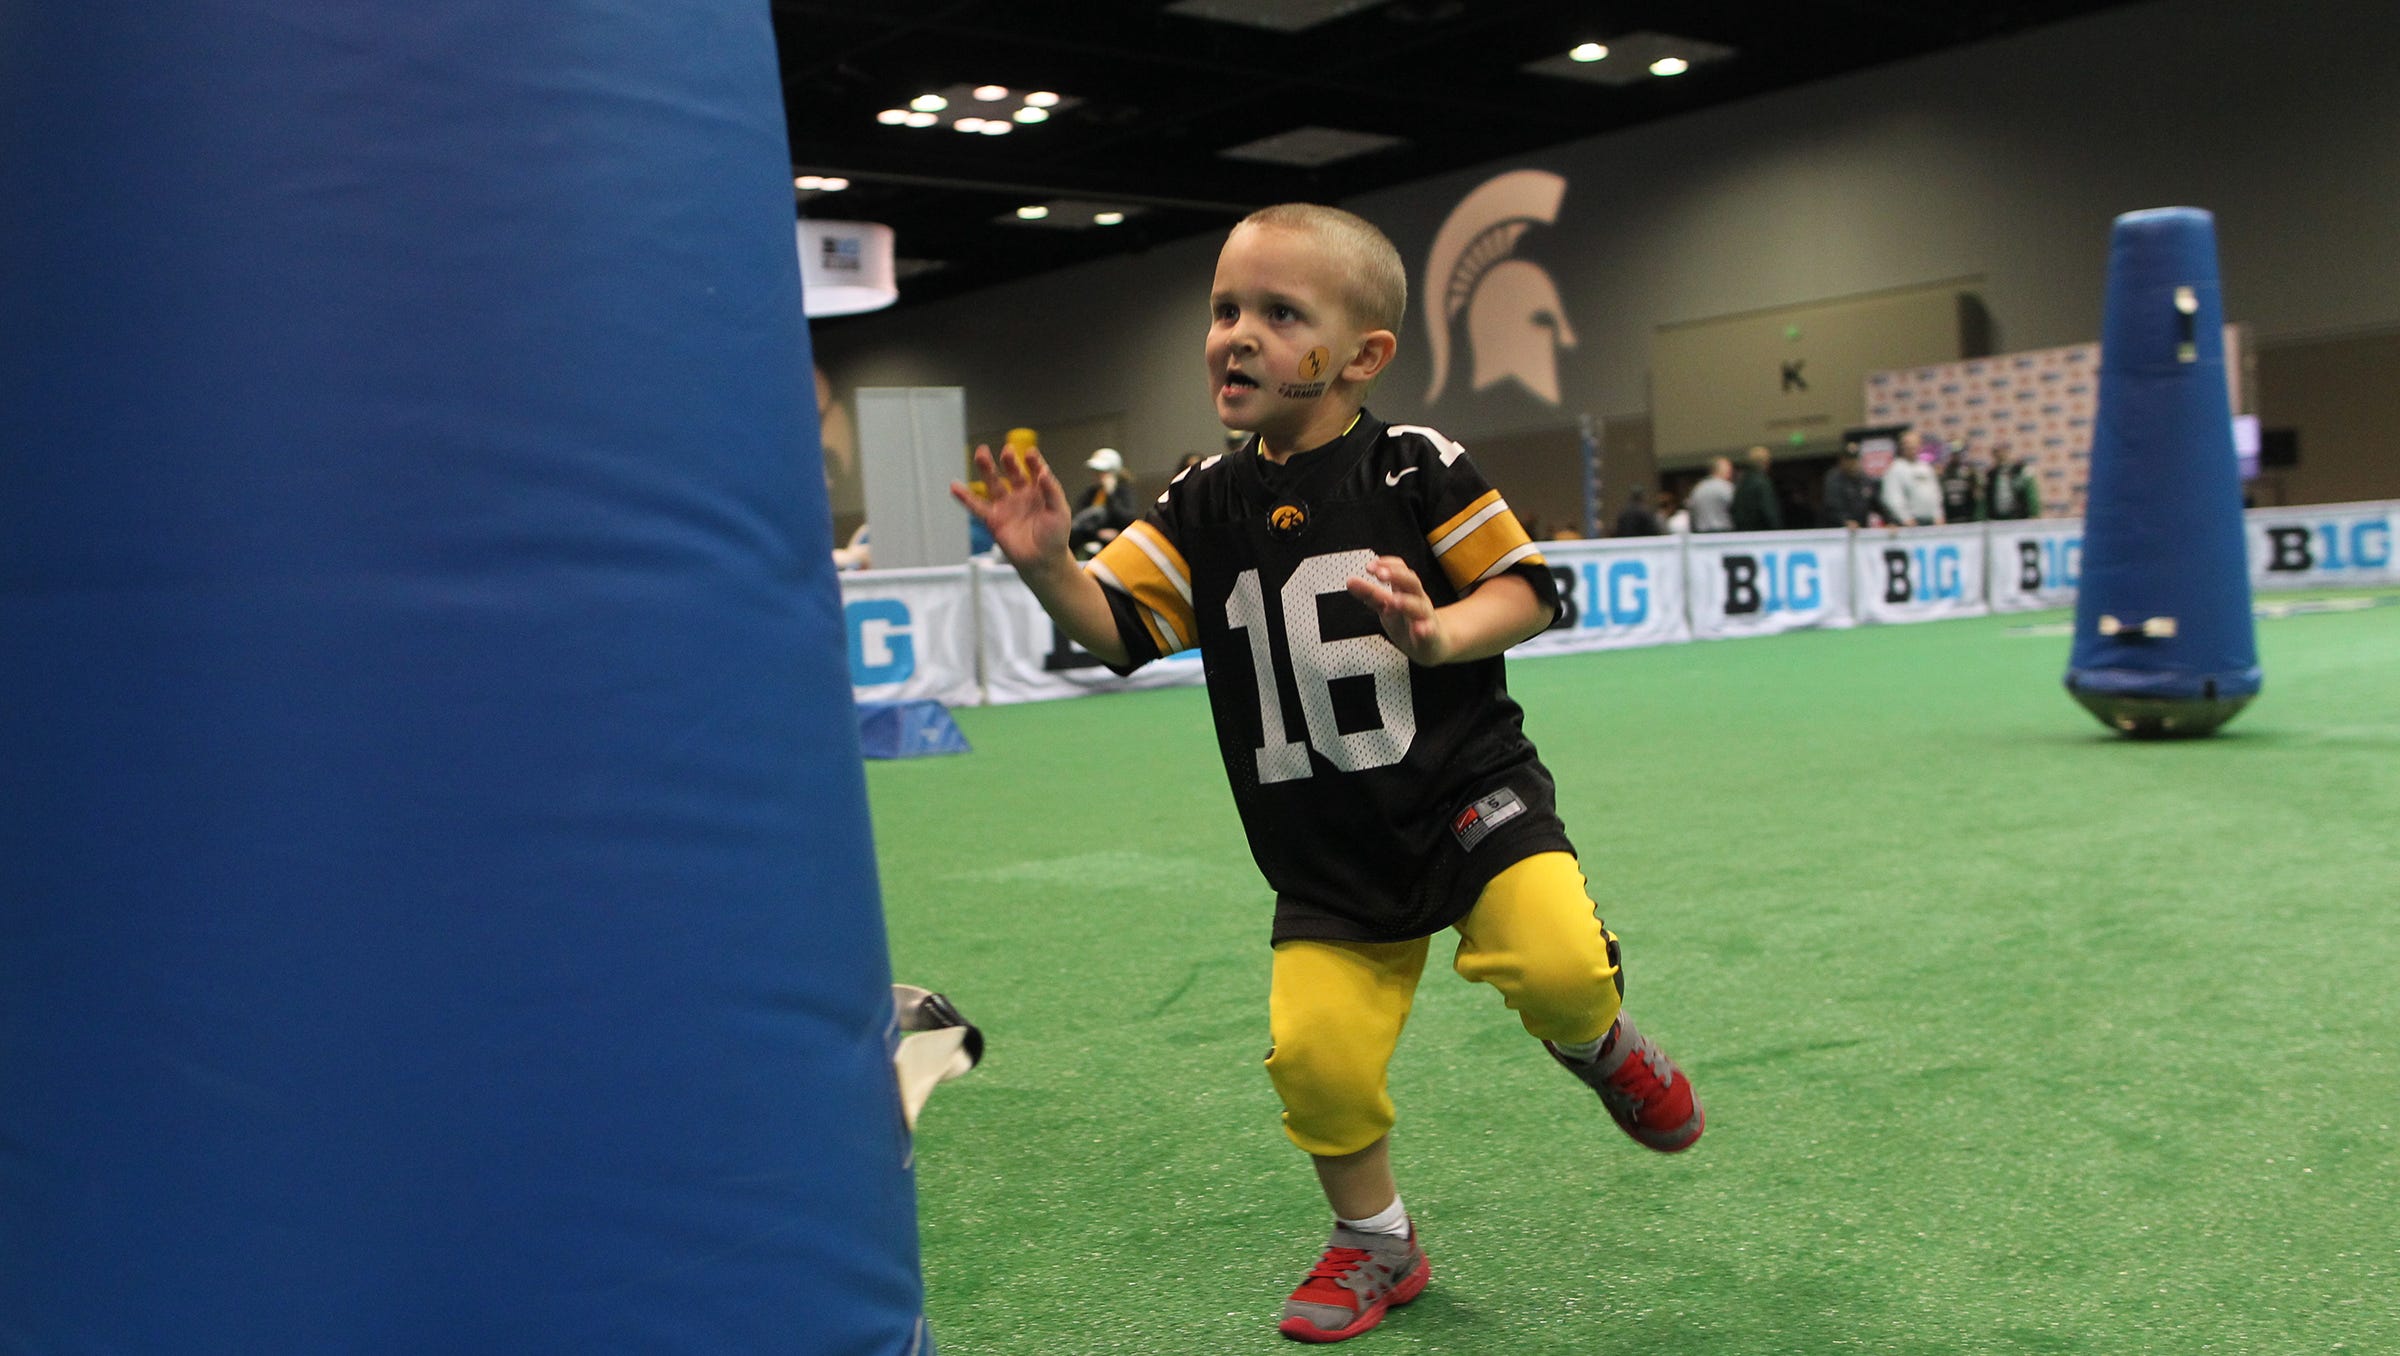 Kade Wagemester, 3, of Long Grove runs through a football obstacle course at the Indiana Convention Center in Indianapolis, Ind. on Saturday, Dec. 5, 2015.